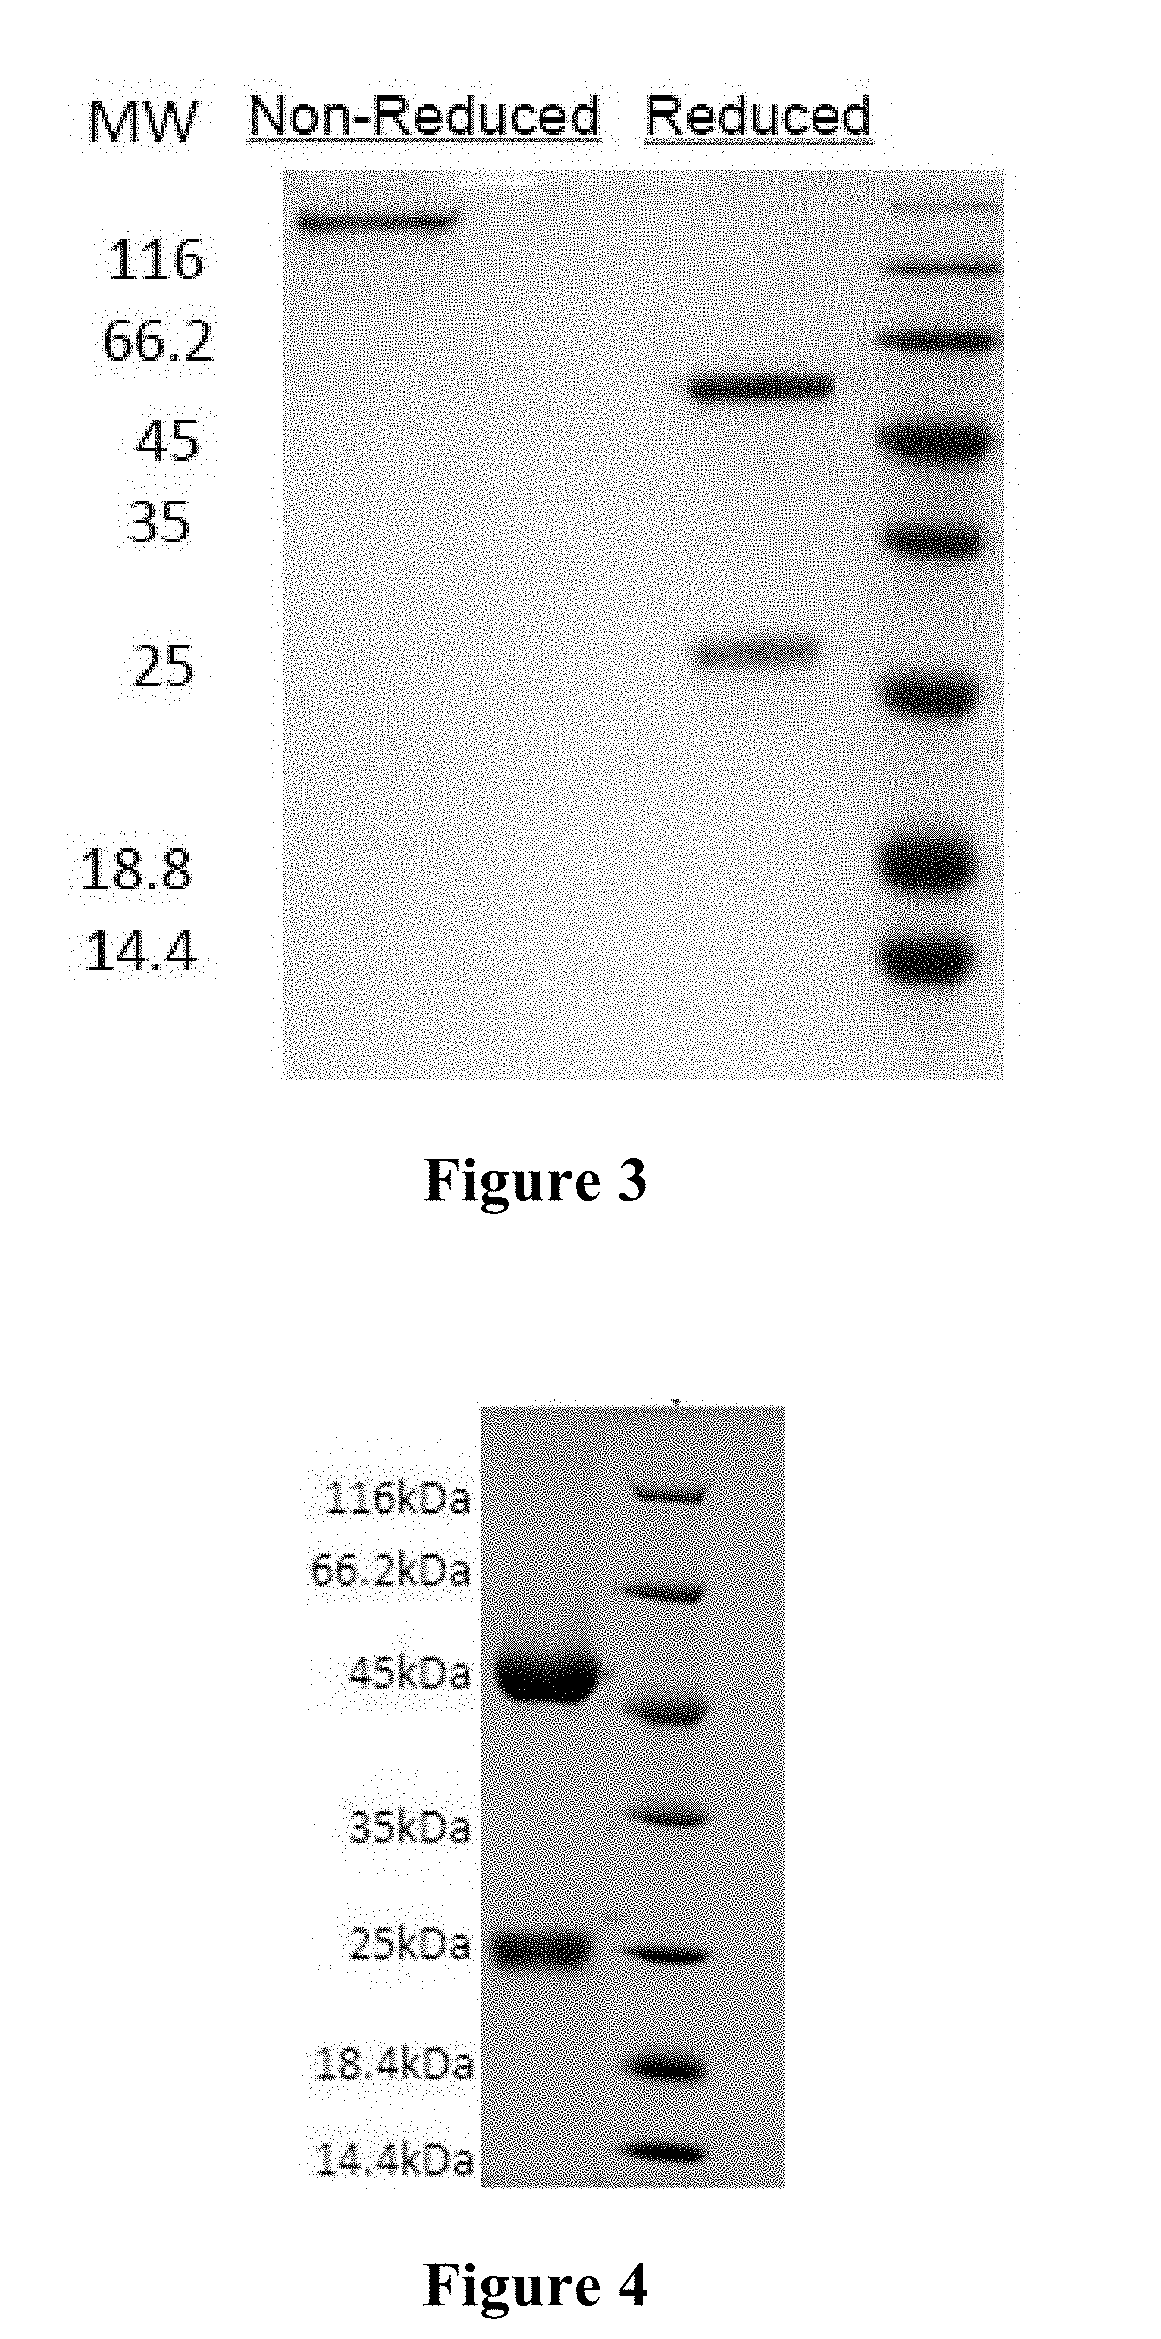 Anti-ctla4 and Anti-pd-1 bifunctional antibody, pharmaceutical composition thereof and use thereof